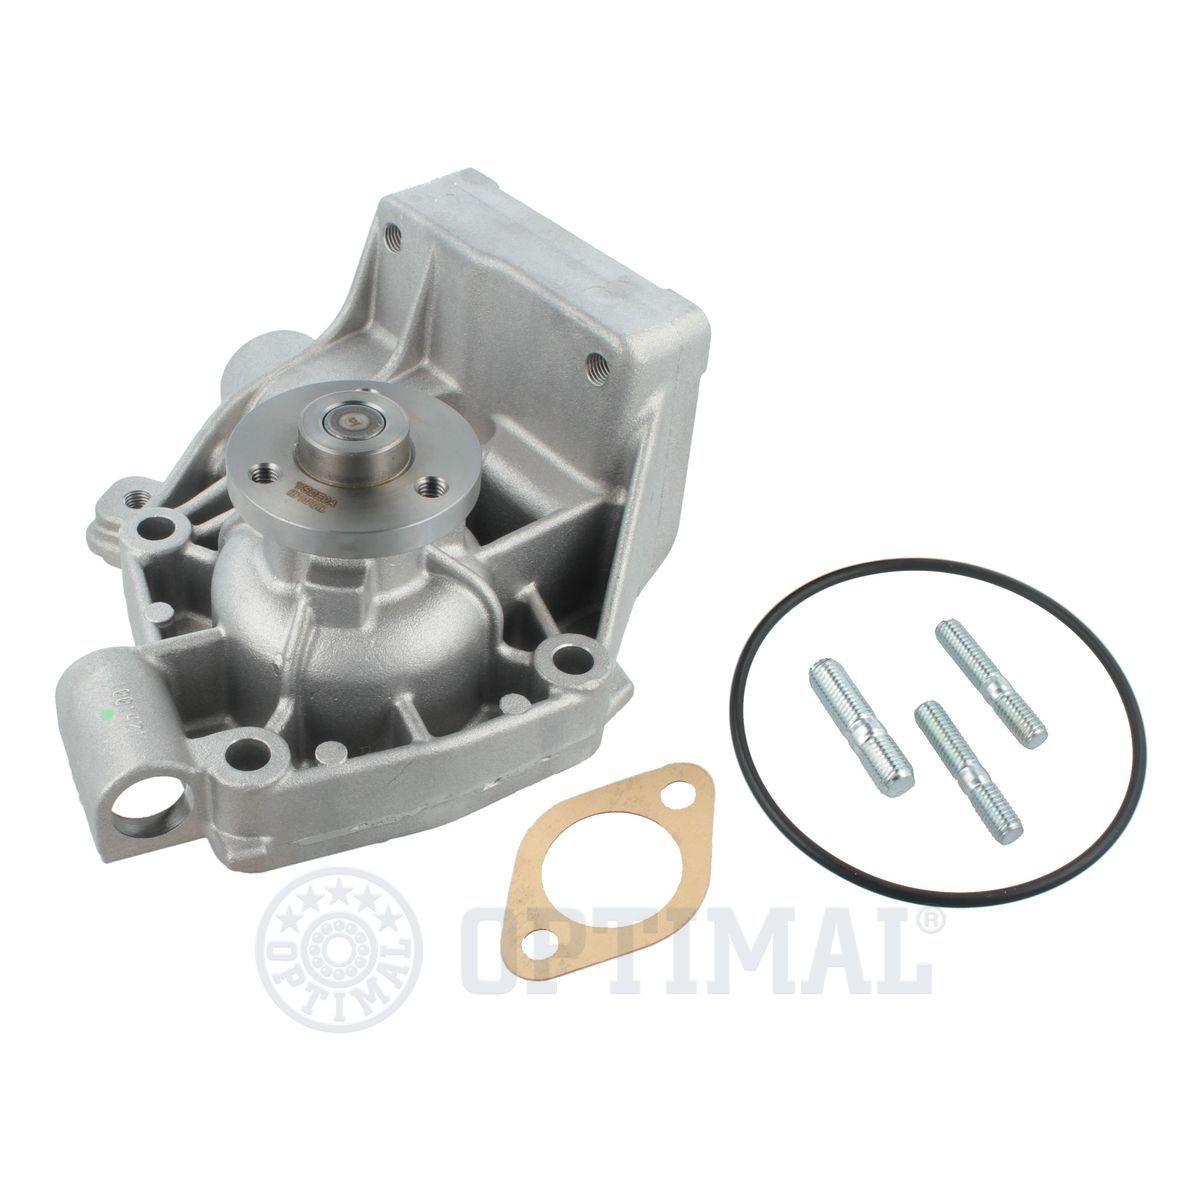 OPTIMAL AQ-1647 Water pump with accessories, with gaskets/seals, with bolts/screws